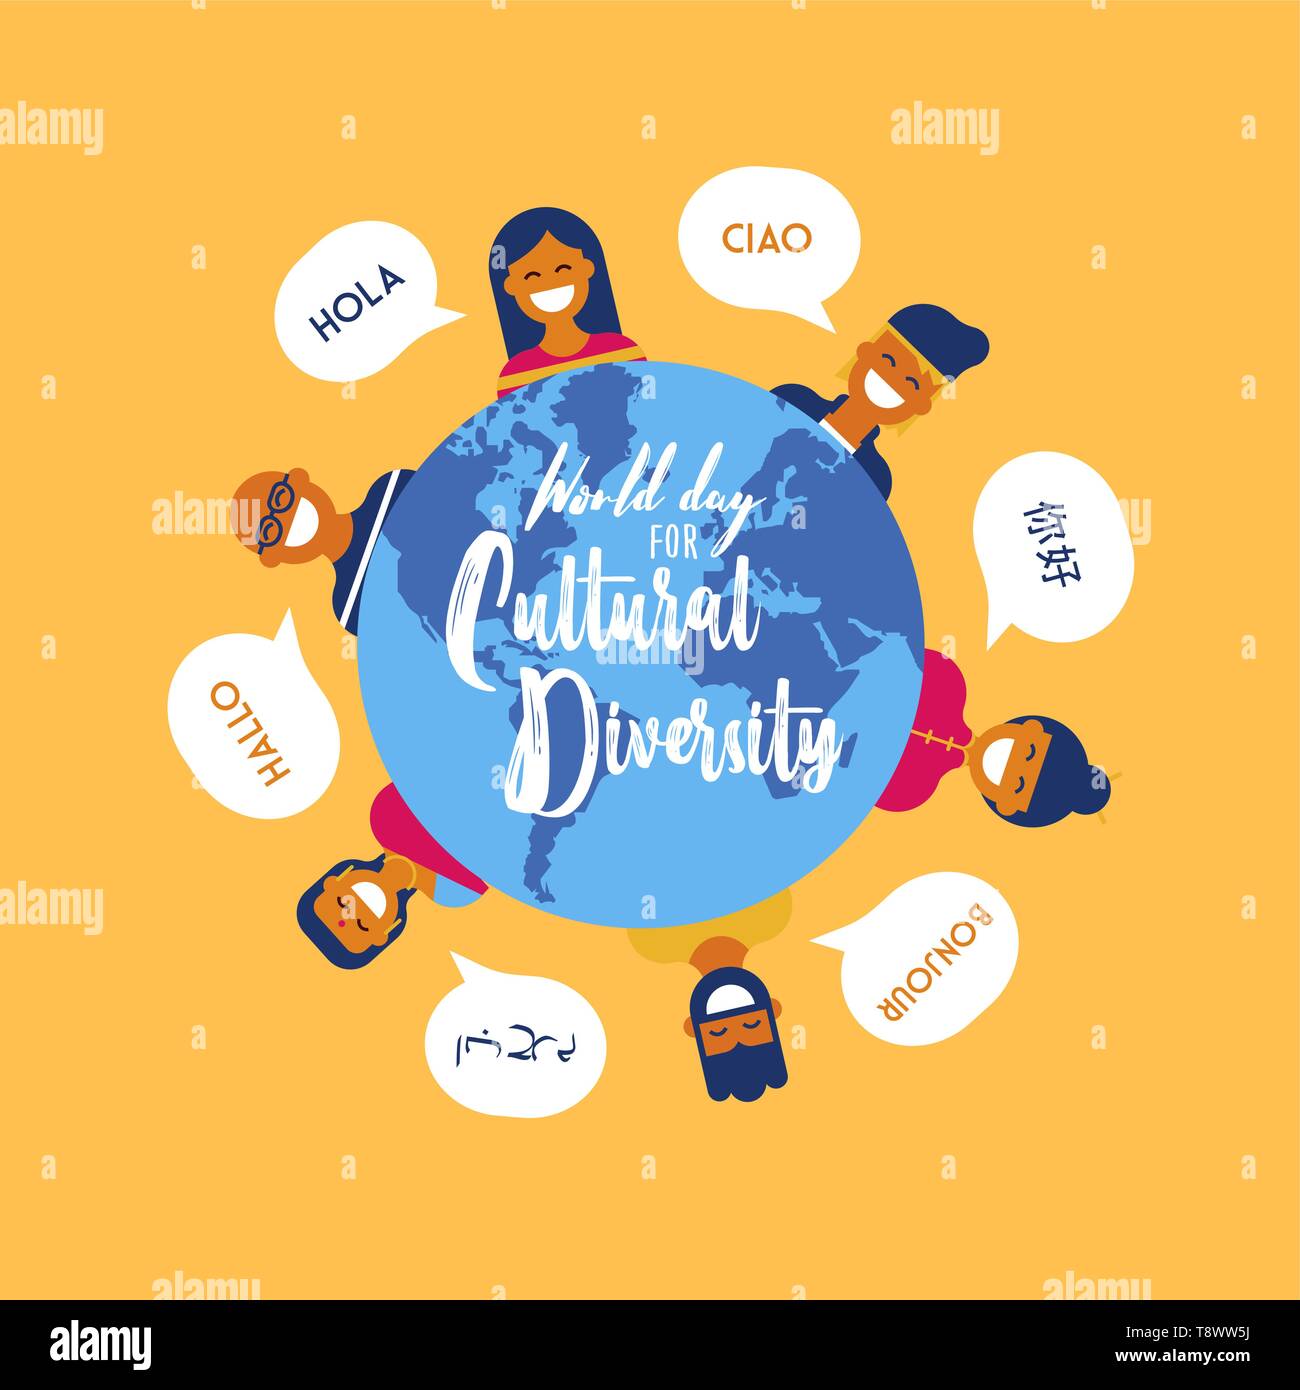 World Day for Cultural Diversity card illustration of diverse ethnic people and earth globe map. International social peace concept. Stock Vector